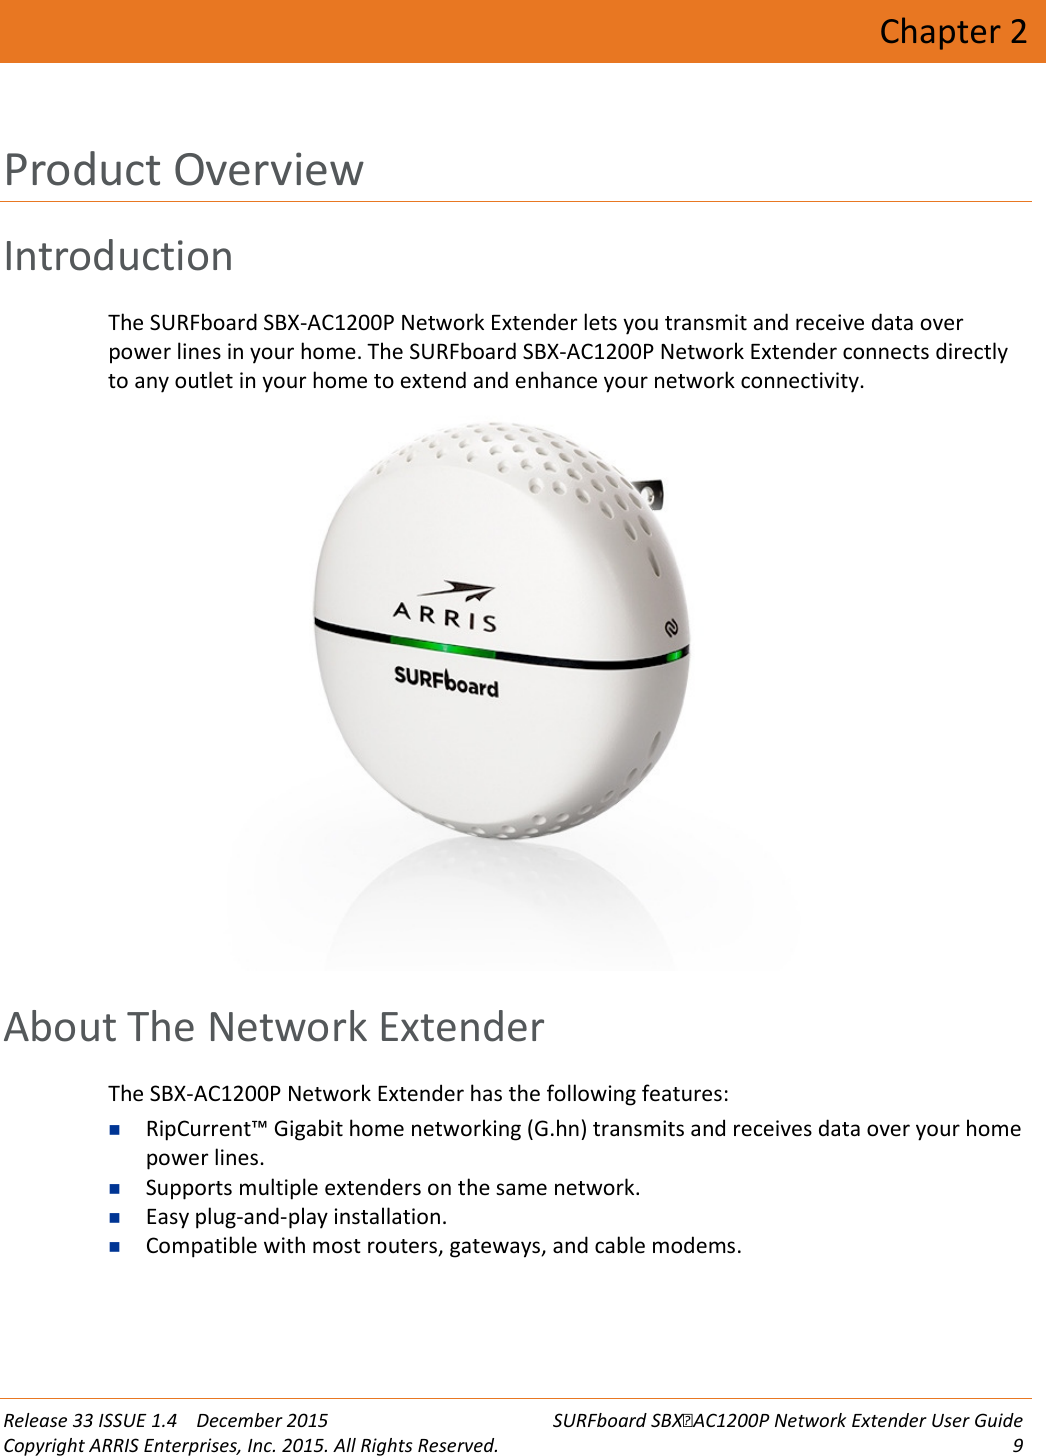  Release 33 ISSUE 1.4    December 2015 SURFboard SBXAC1200P Network Extender User Guide Copyright ARRIS Enterprises, Inc. 2015. All Rights Reserved.  9  Chapter 2 Product Overview Introduction The SURFboard SBX-AC1200P Network Extender lets you transmit and receive data over power lines in your home. The SURFboard SBX-AC1200P Network Extender connects directly to any outlet in your home to extend and enhance your network connectivity.    About The Network Extender The SBX-AC1200P Network Extender has the following features:  RipCurrent™ Gigabit home networking (G.hn) transmits and receives data over your home power lines.  Supports multiple extenders on the same network.  Easy plug-and-play installation.  Compatible with most routers, gateways, and cable modems.   